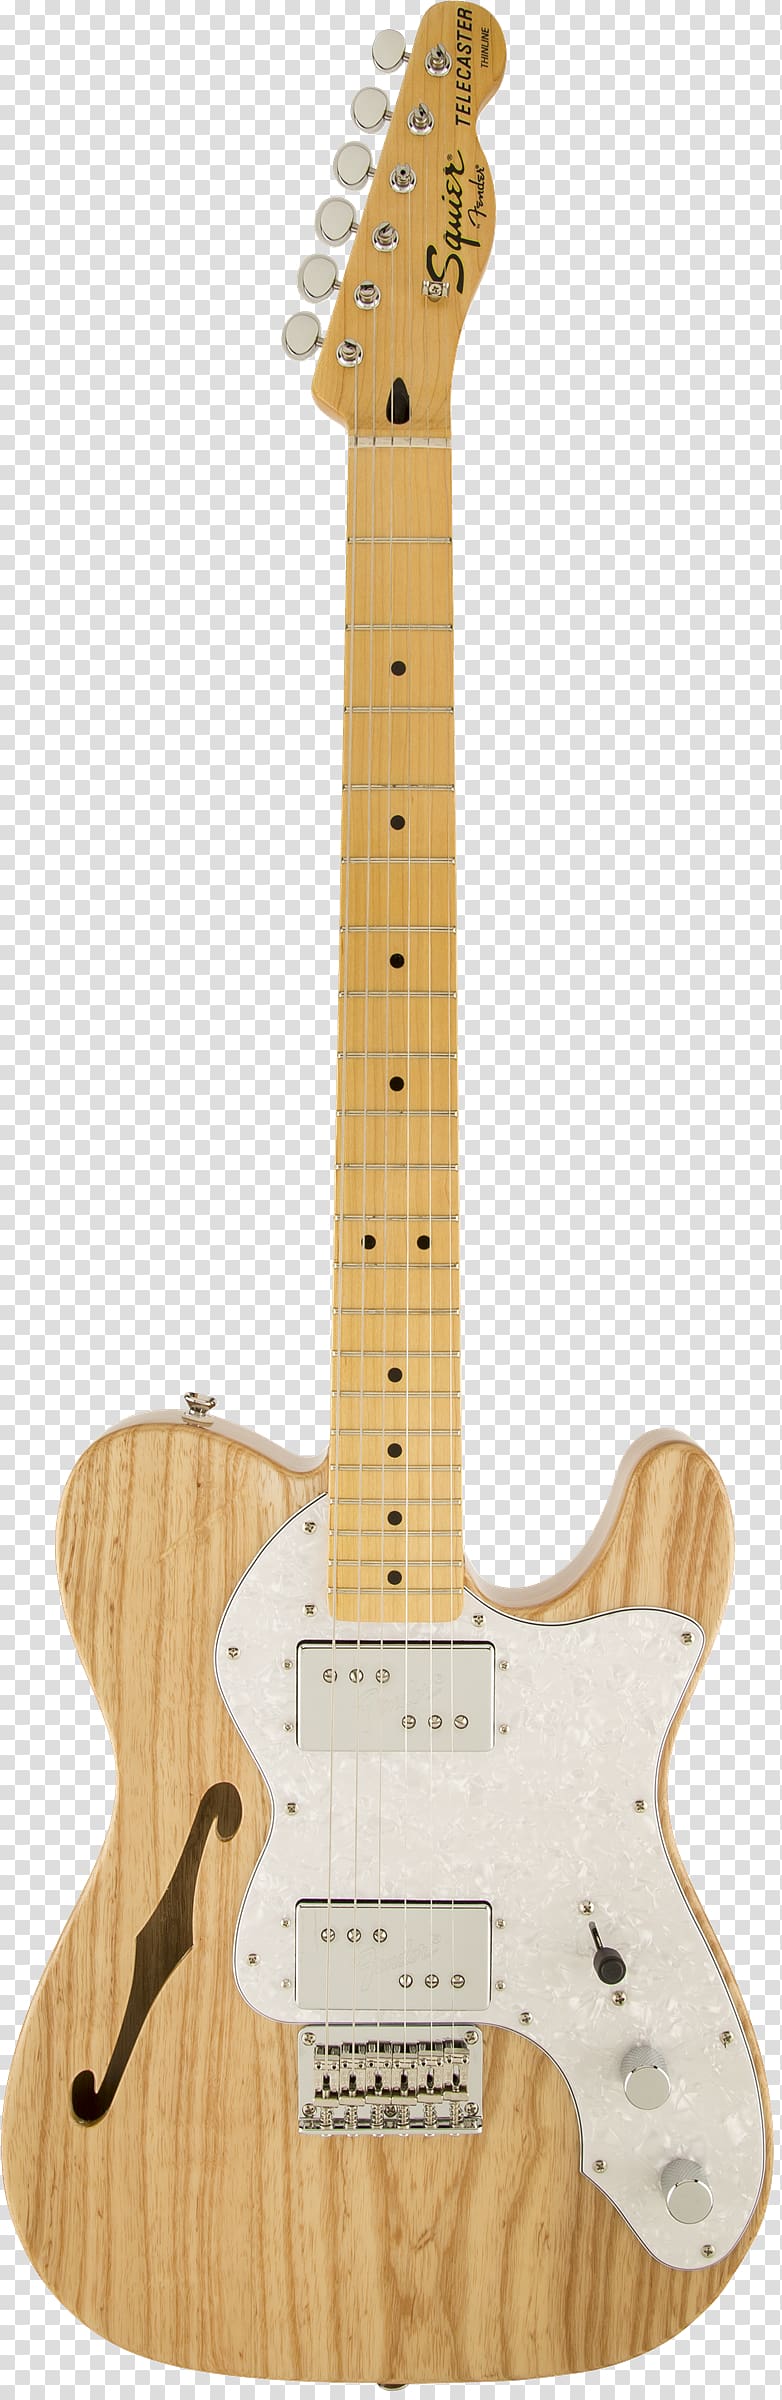 Fender Telecaster Thinline Fender Stratocaster Squier Musical Instruments, electric guitar transparent background PNG clipart